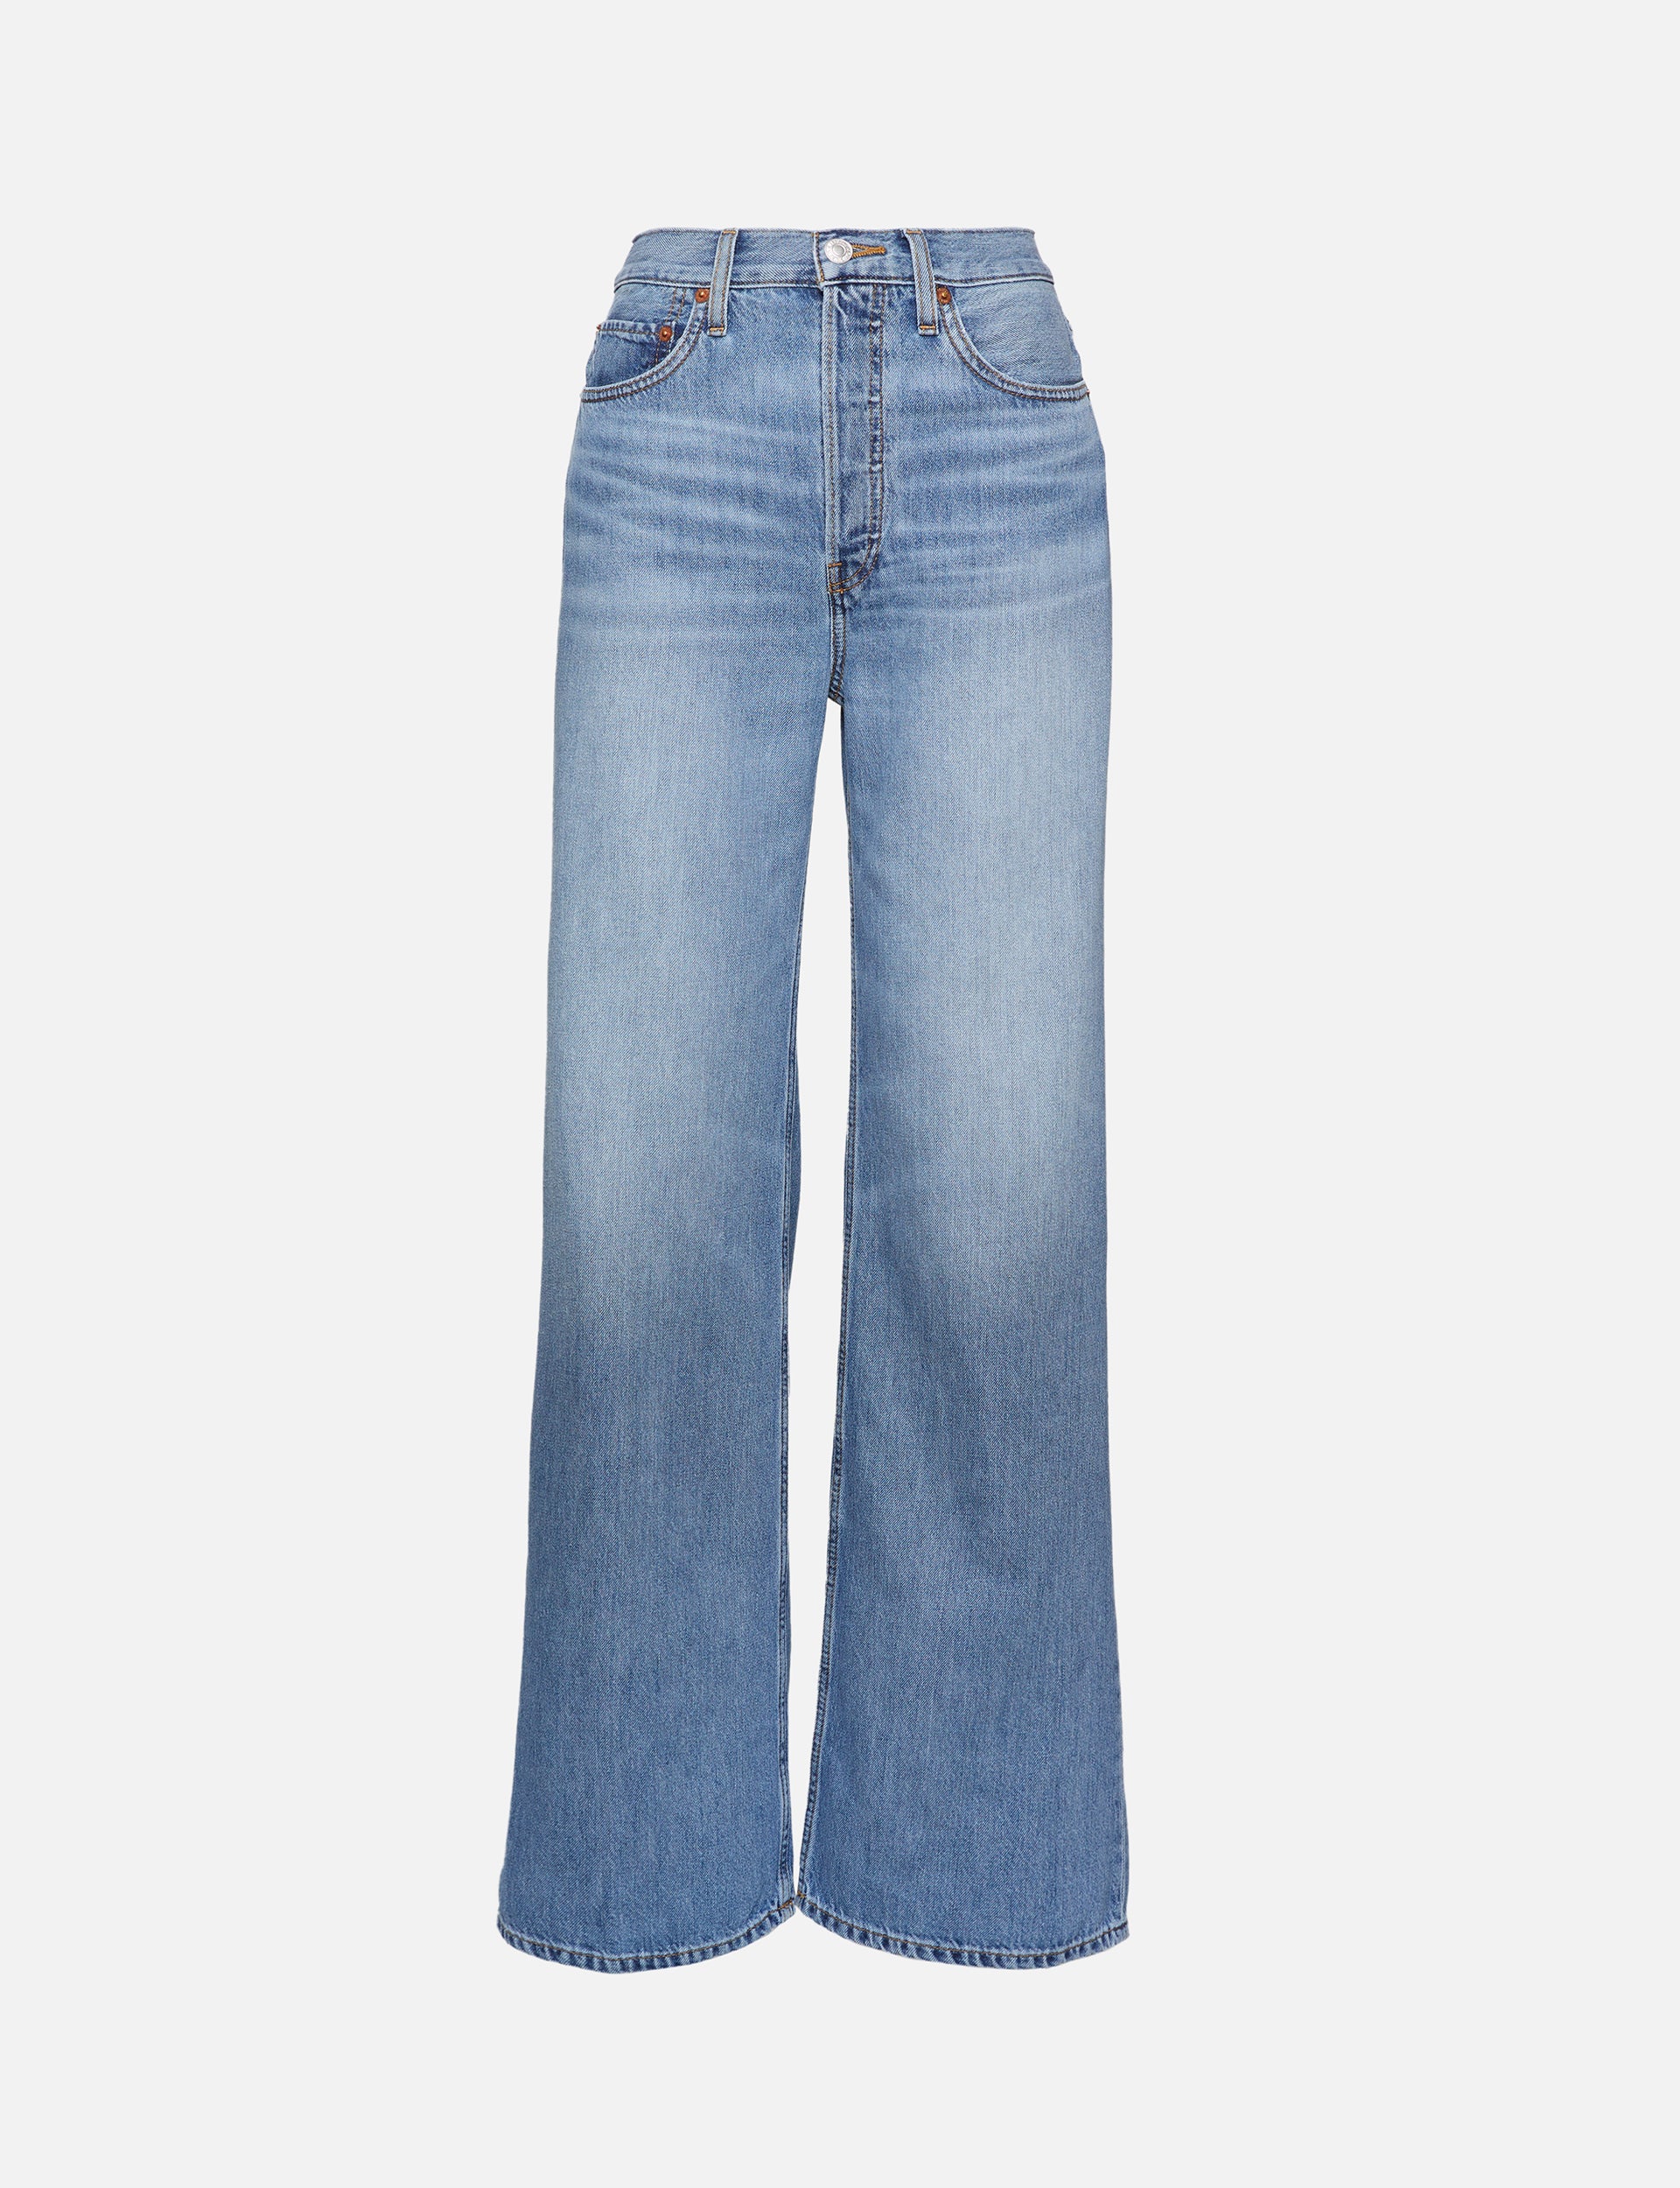 Ultra High Rise Flare Jean at Seven7 Jeans